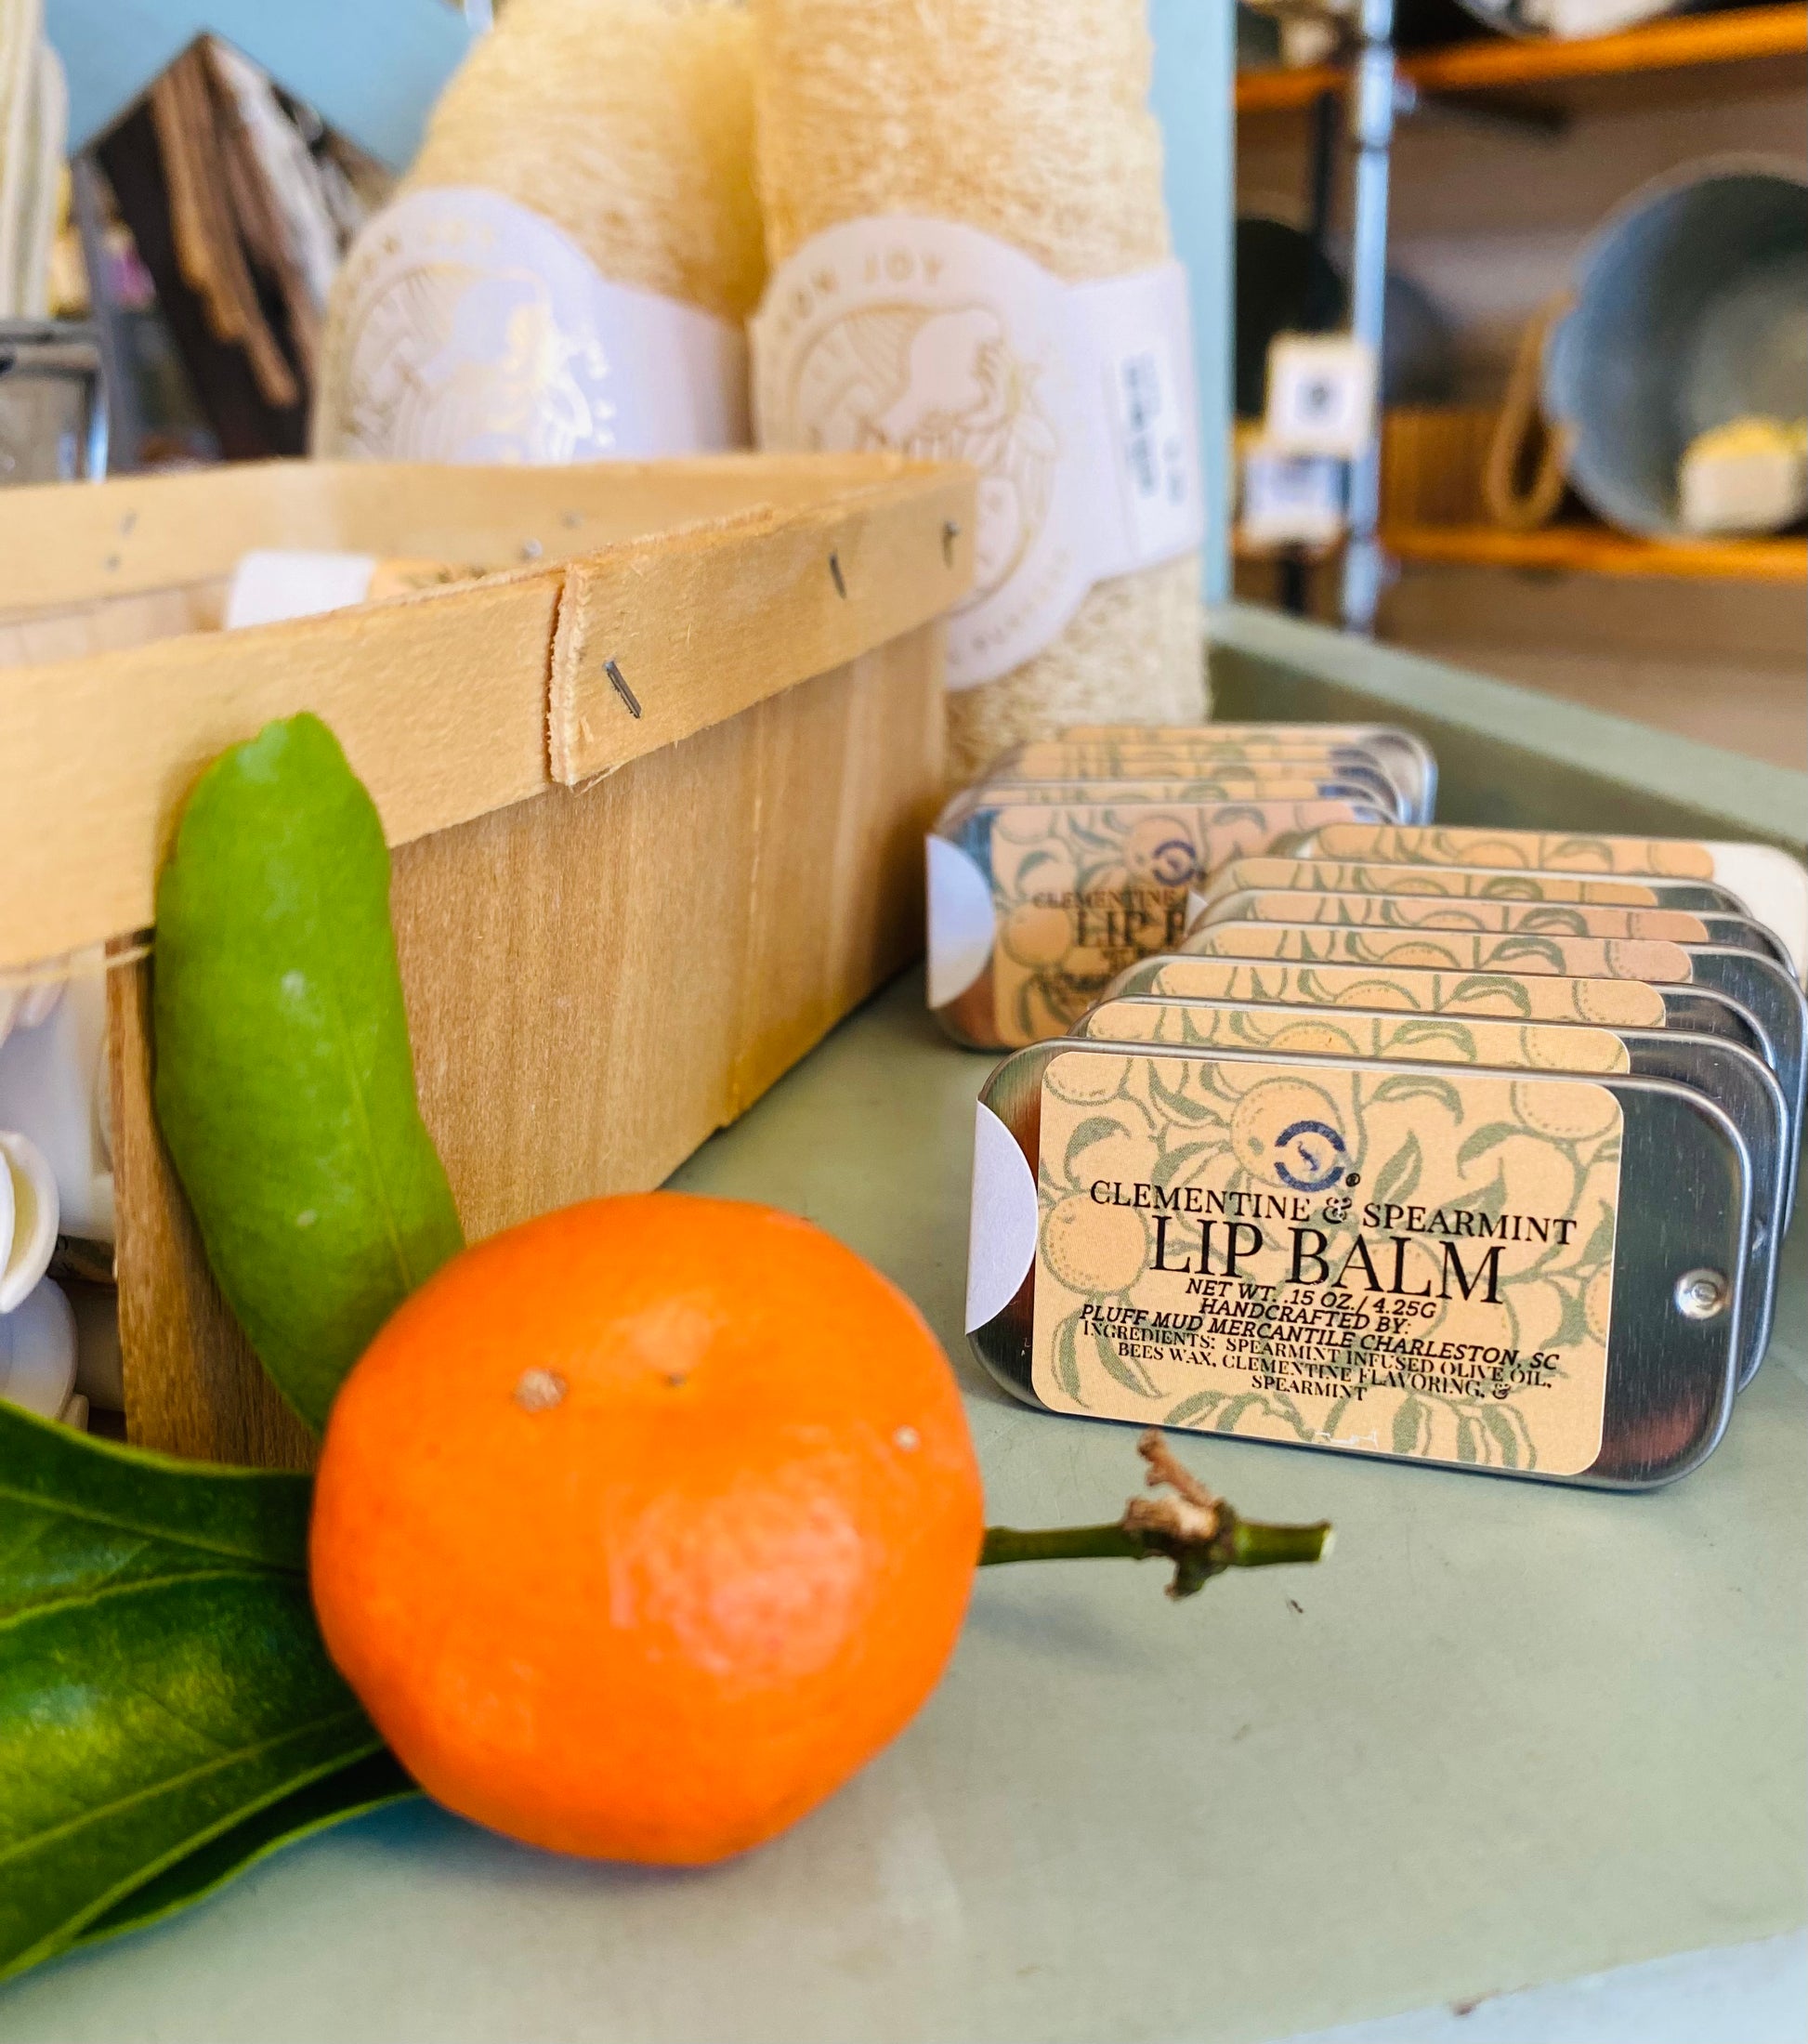 Clementine & Spearmint Olive Oil & Beeswax Lip Balm - Pluff Mud Mercantile